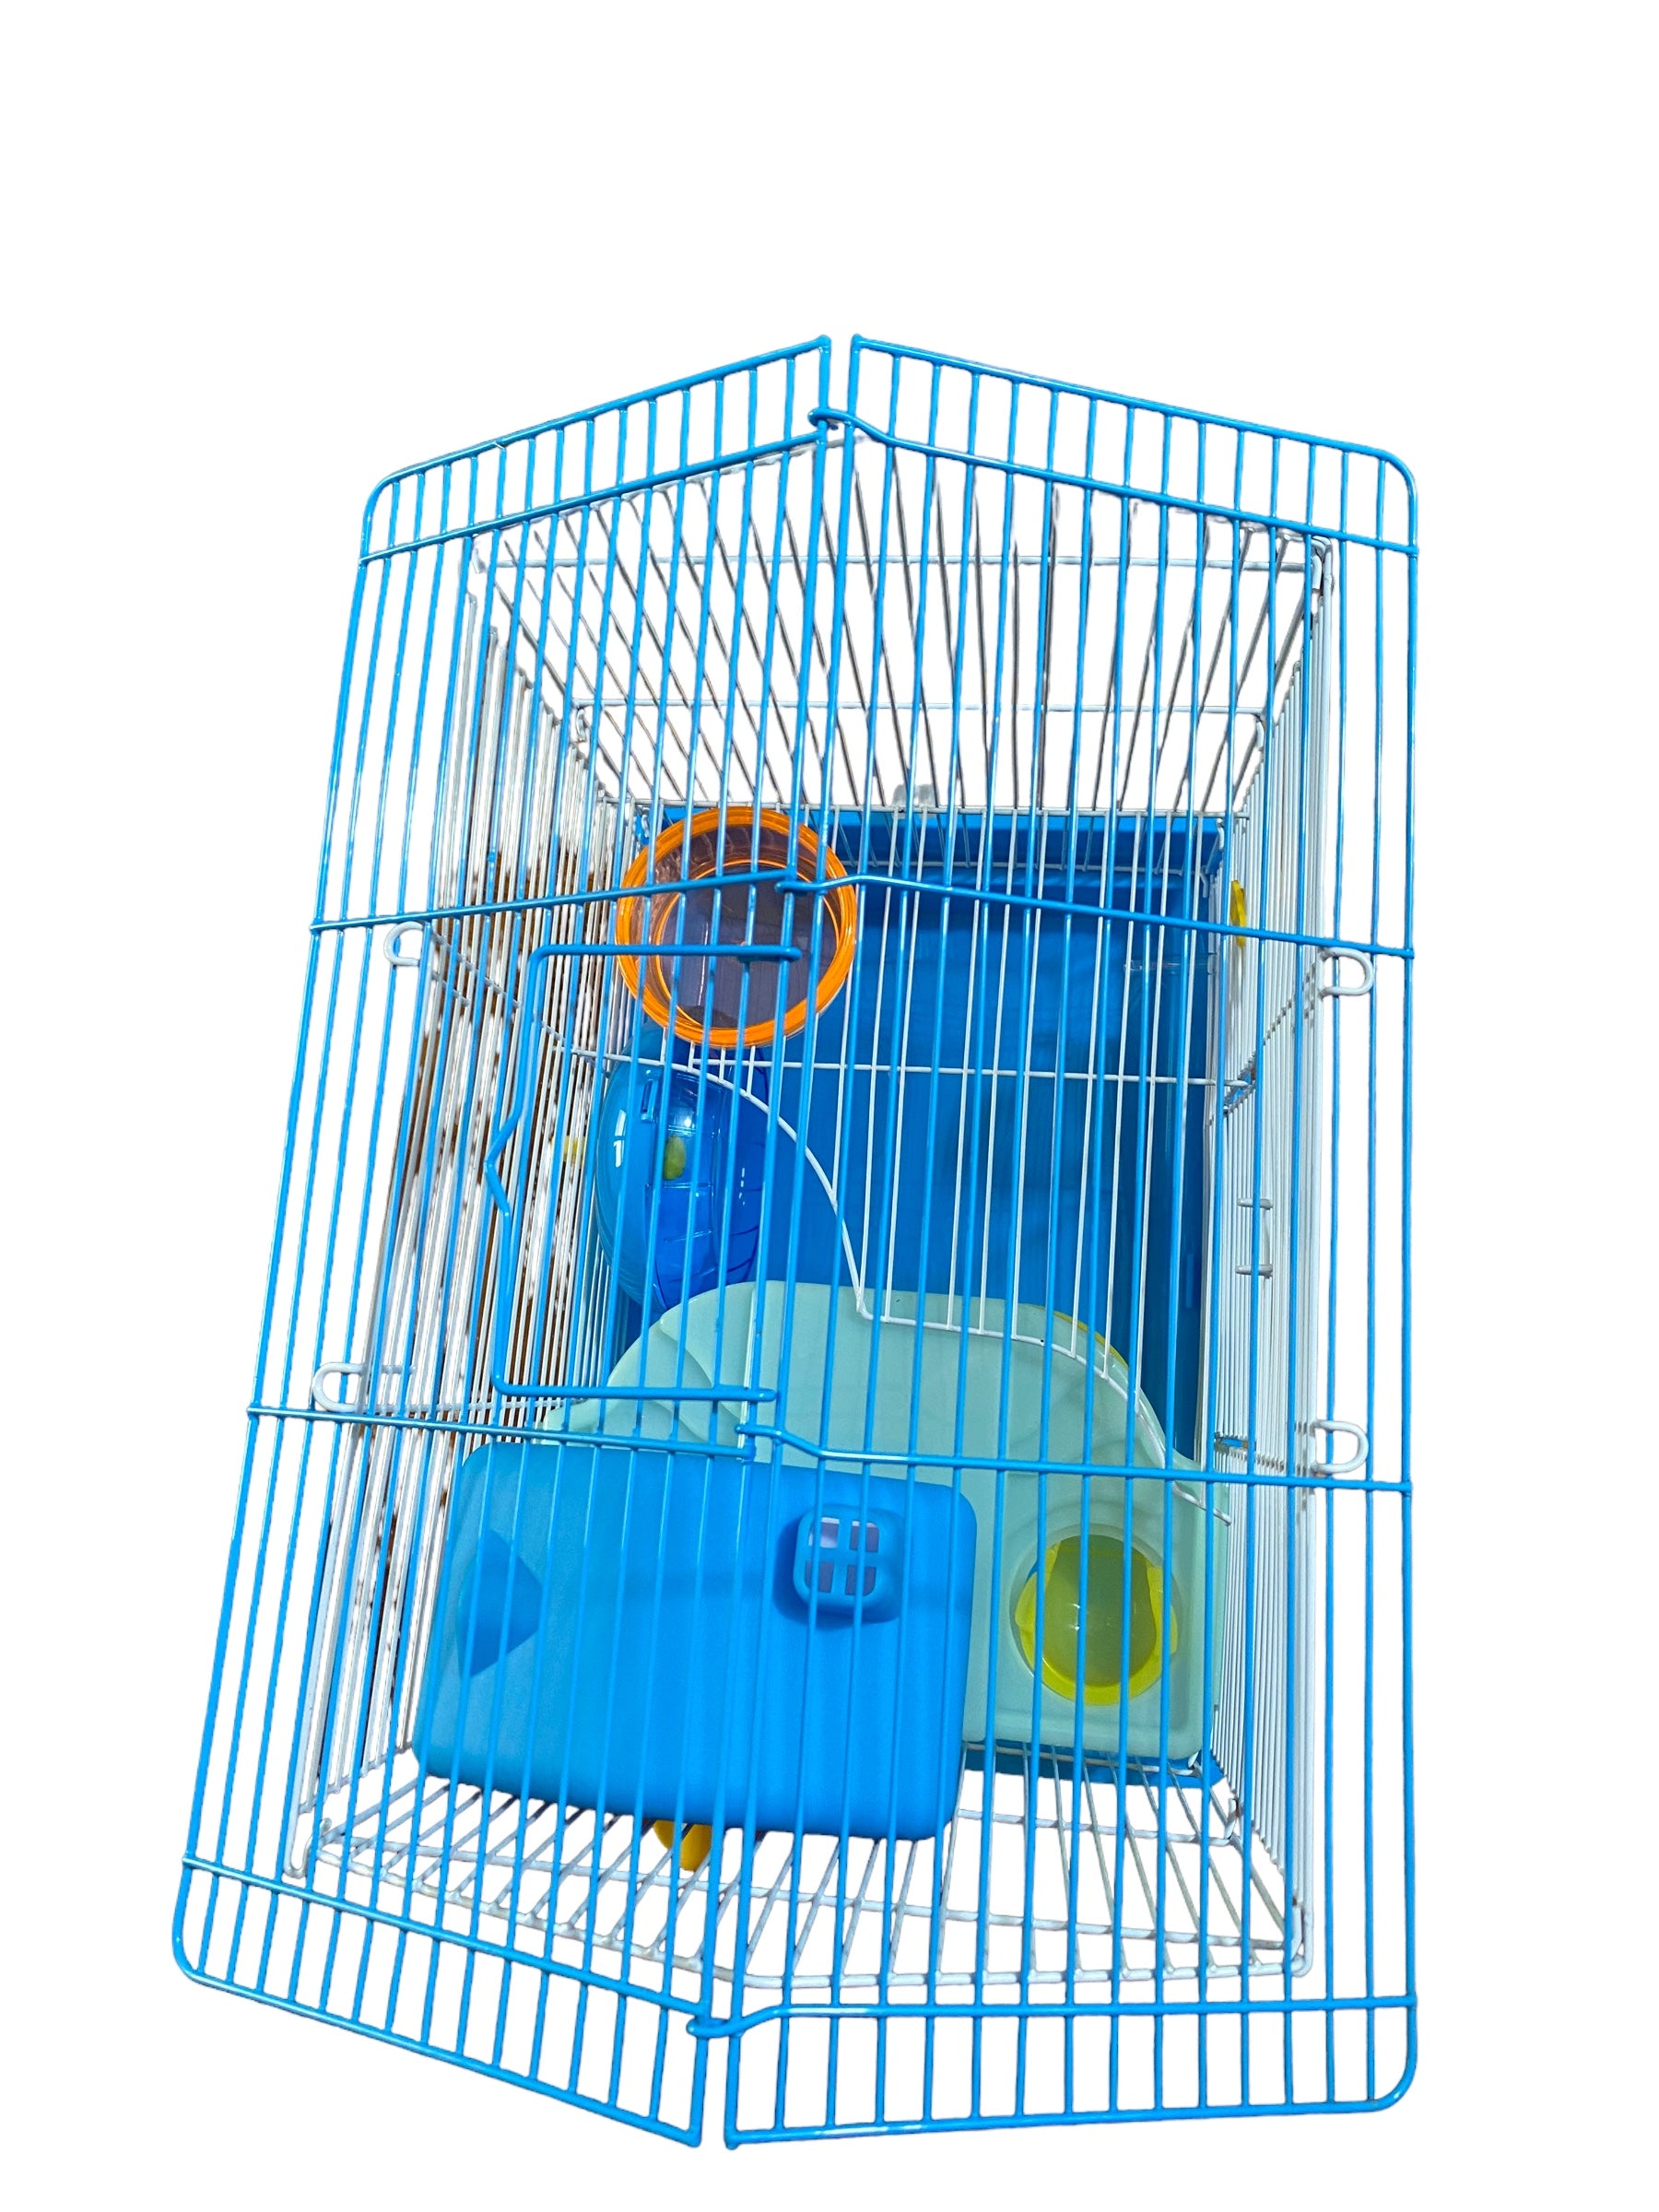 Gorilla pets Hamster Cage/Playhouse for Dwarf Hamster/Gerbil/Mice with a Food Cup, Water Bottle and Exercise Wheel with Spacious Two ladders cage (Color May Vary)